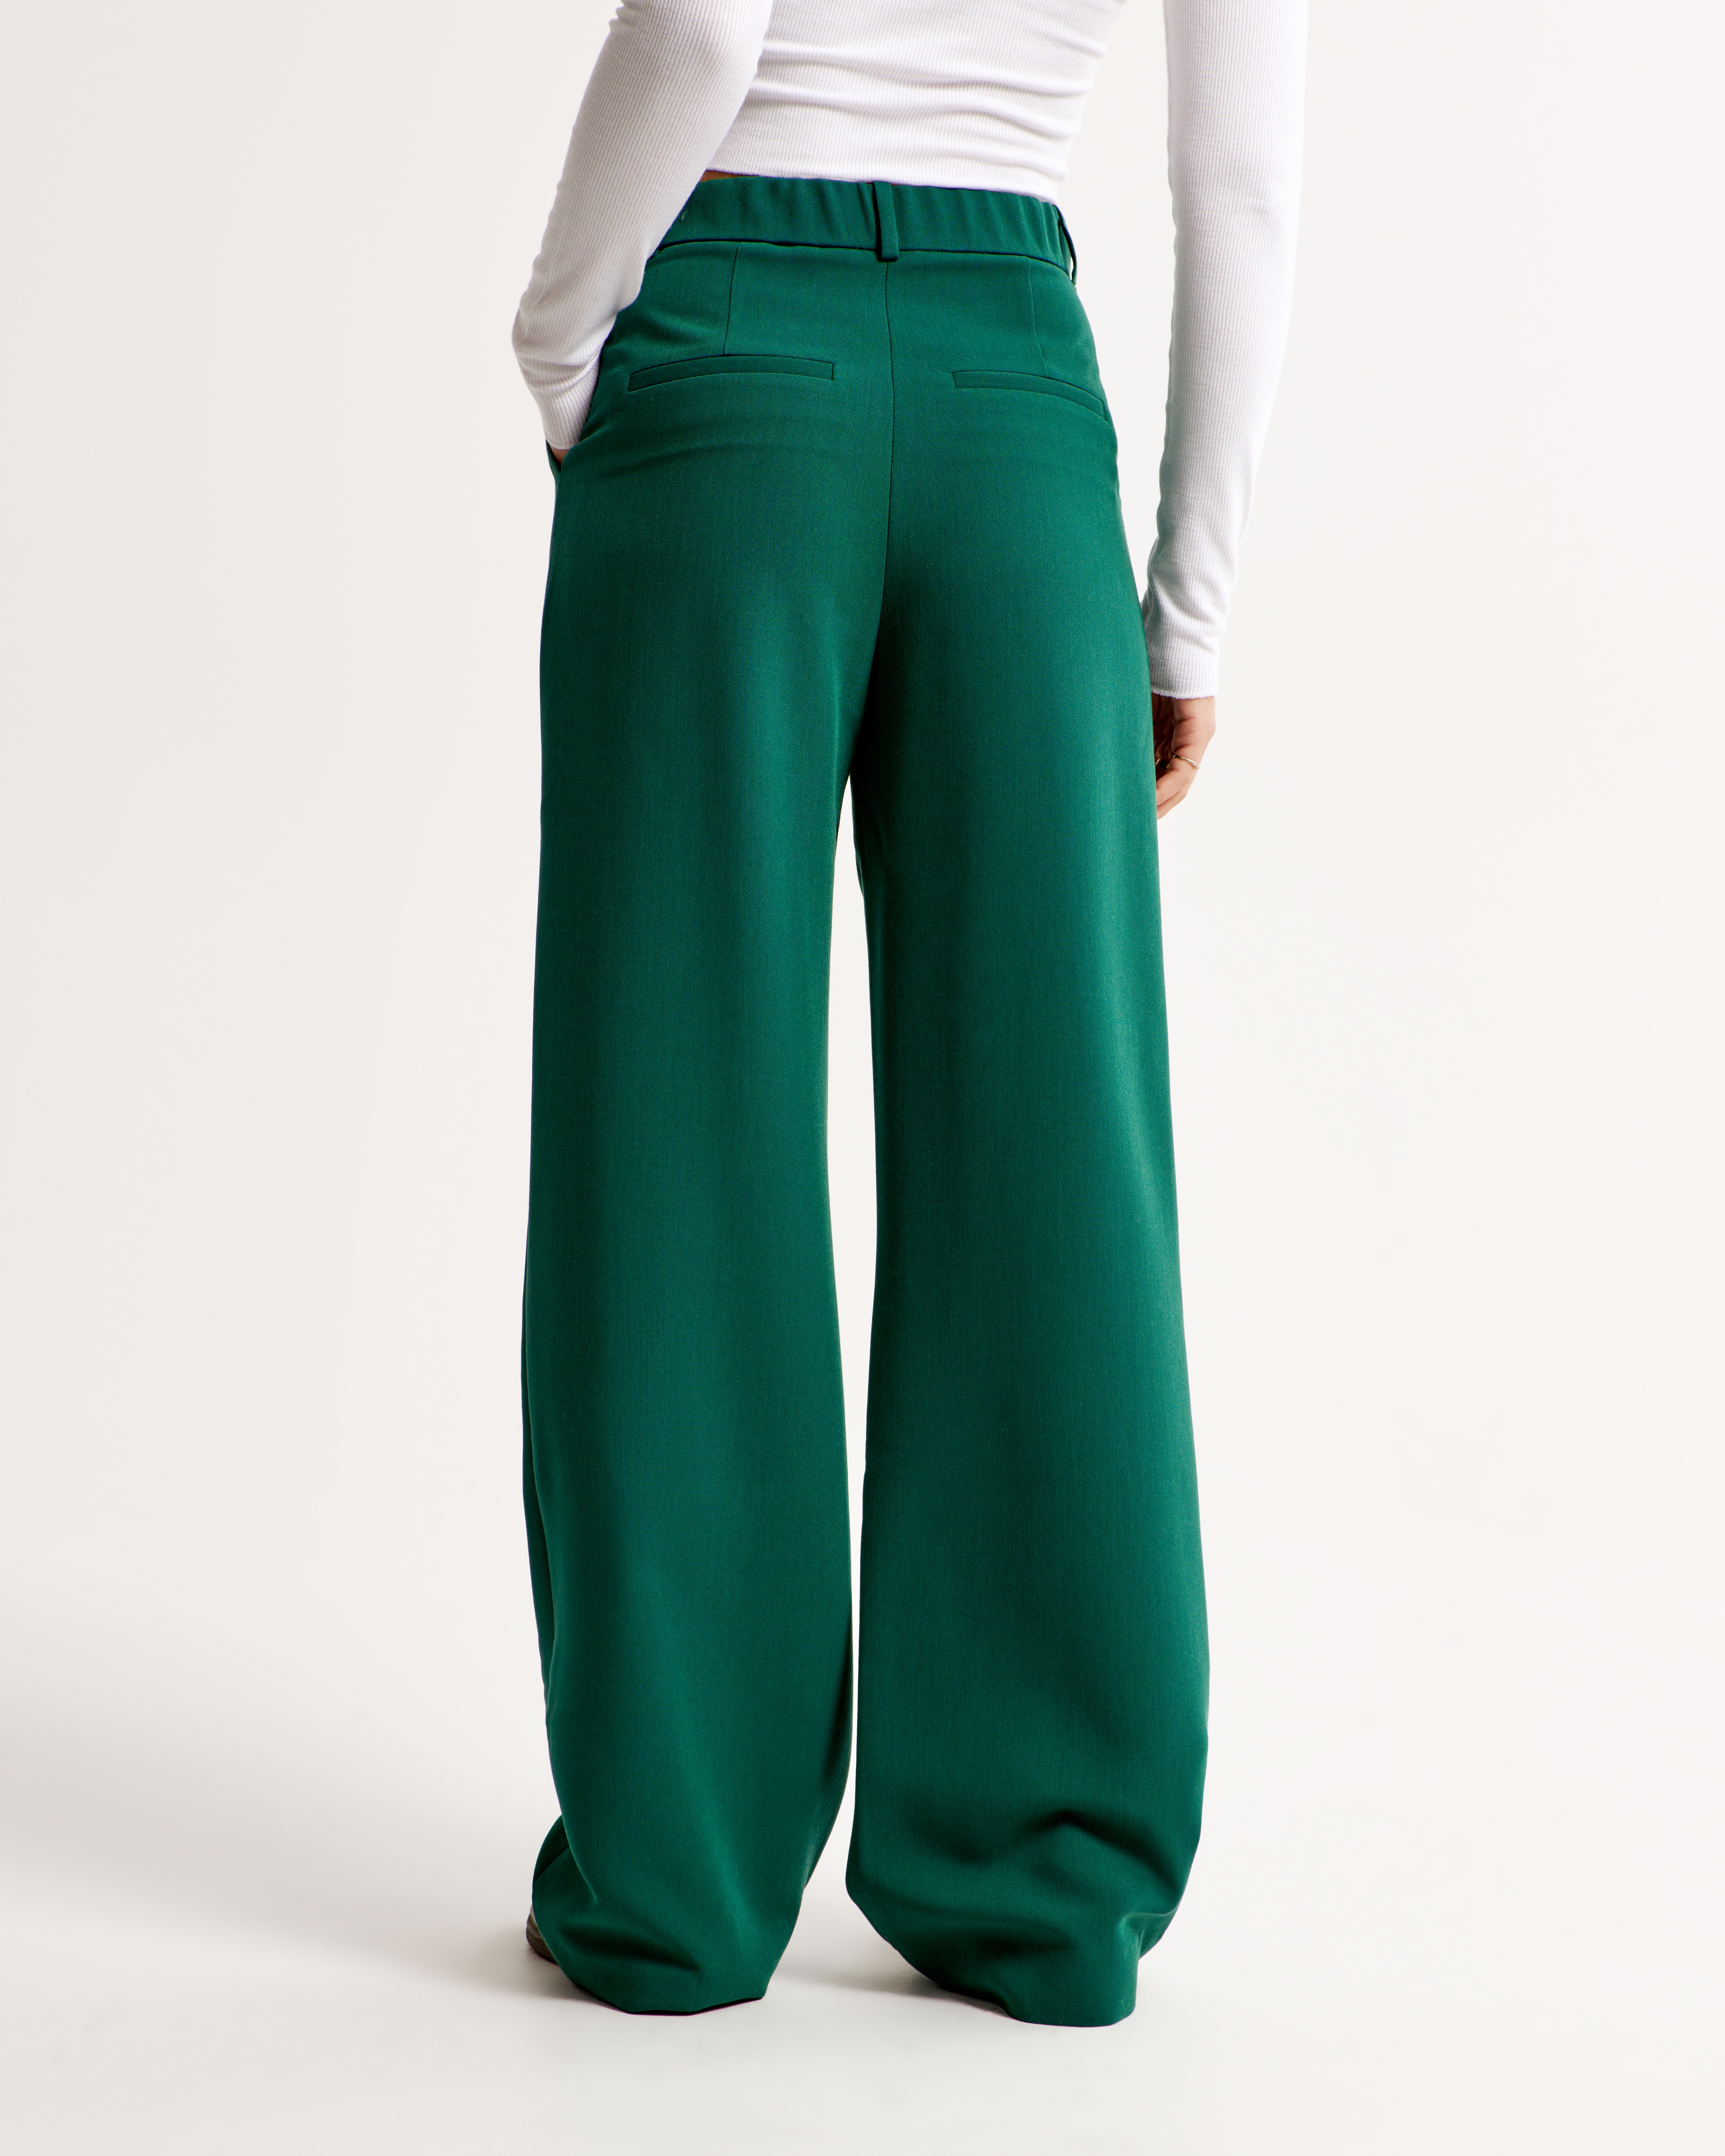 Women's A&F Sloane Tailored Pant | Women's New Arrivals